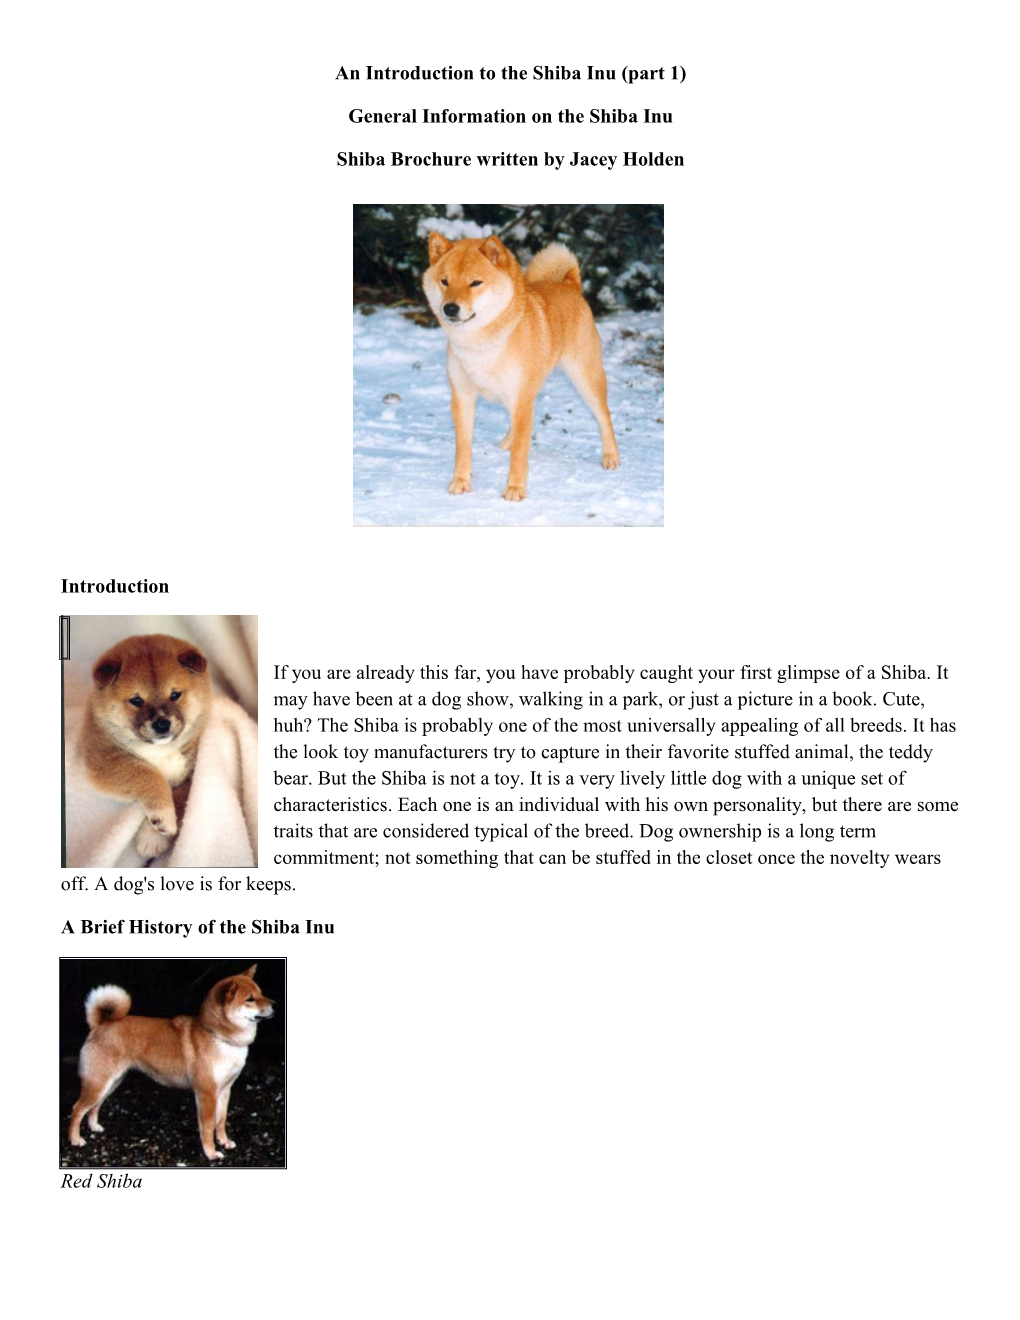 An Introduction to the Shiba Inu (Part 1)